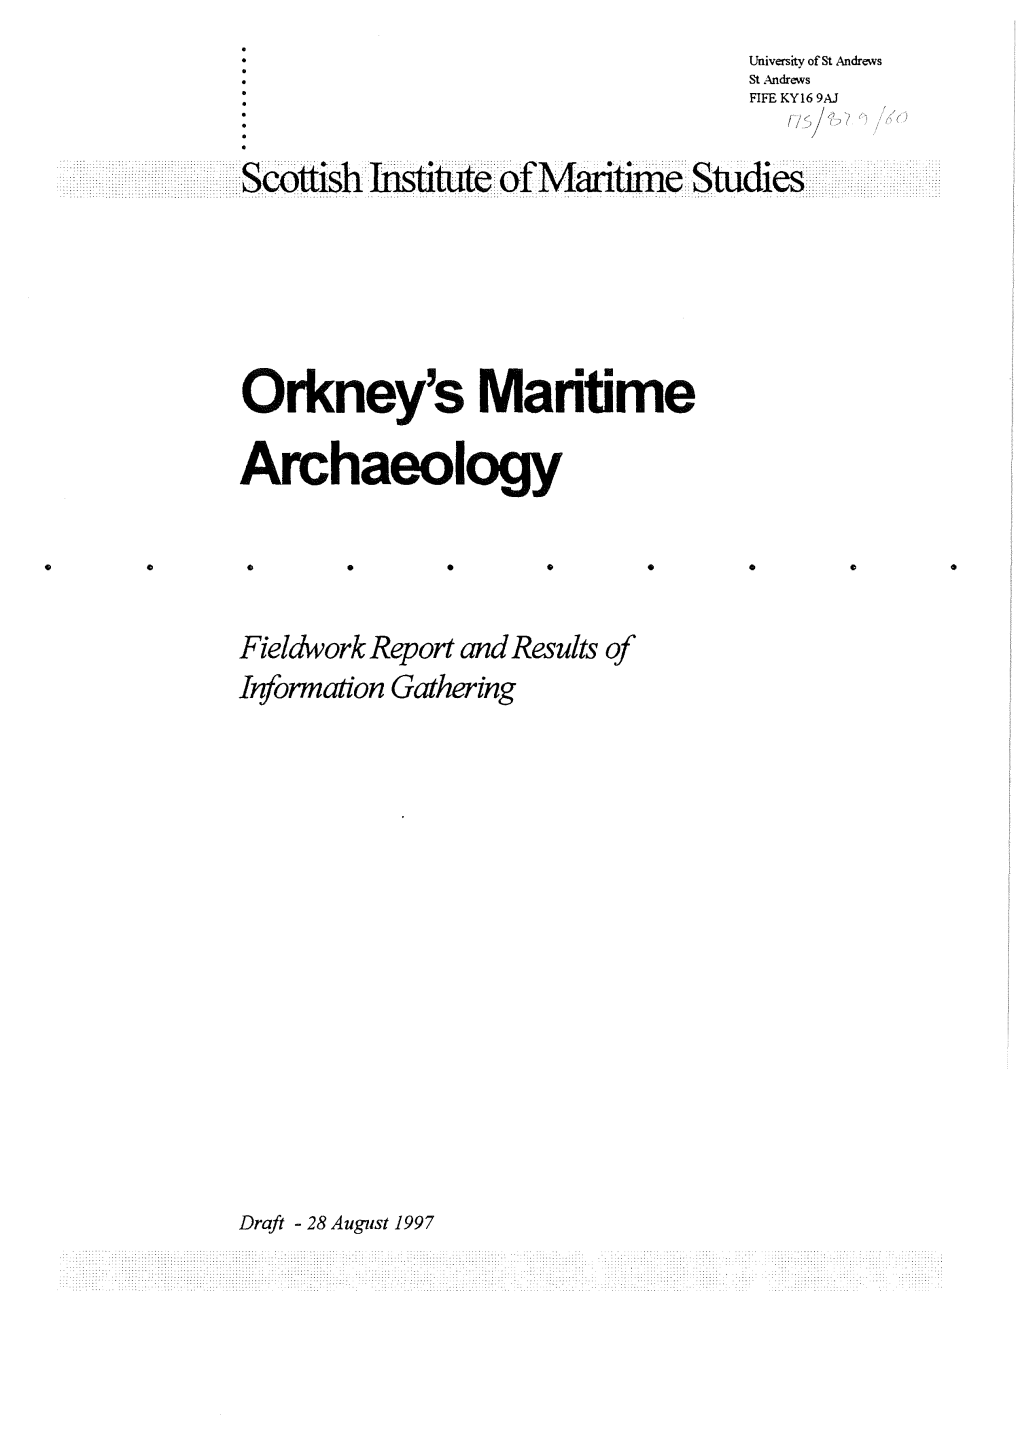 Orkney's Maritime Archaeology